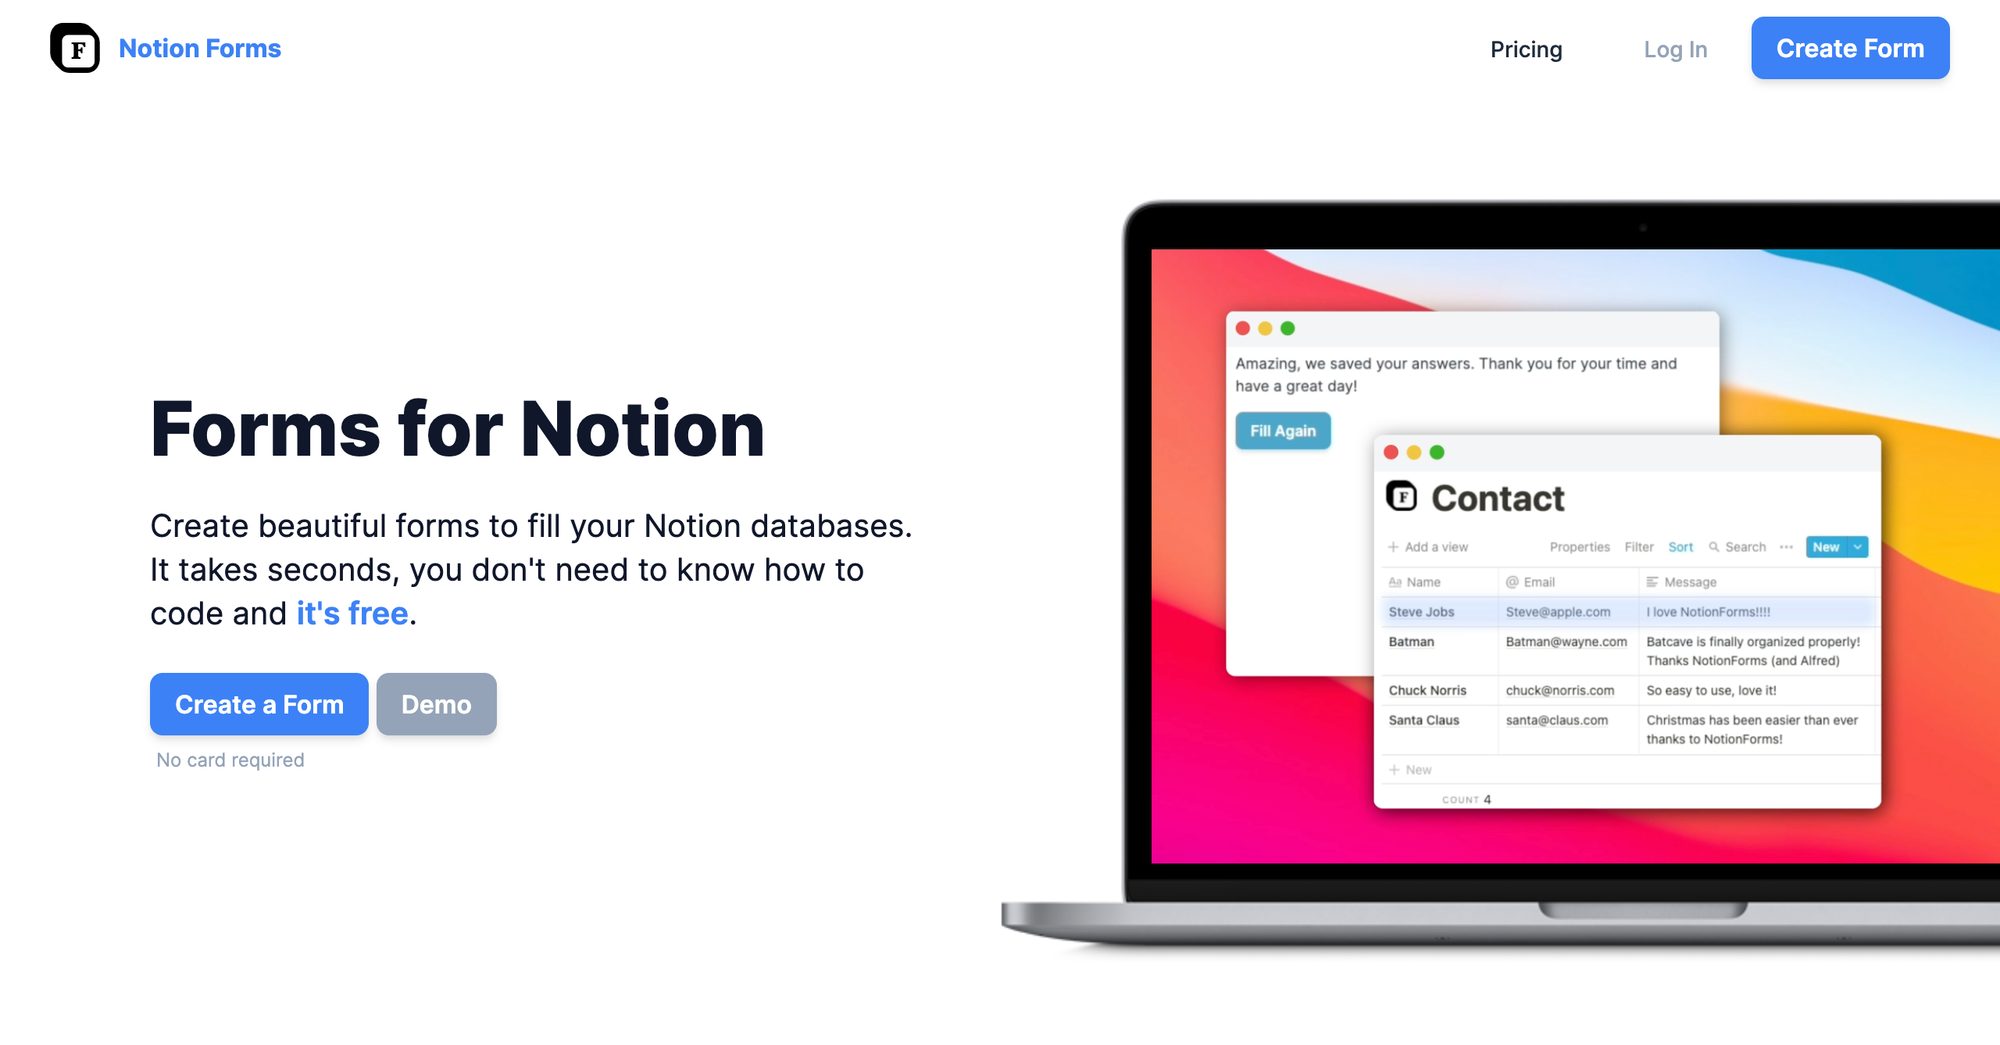 Create_beautiful_forms_to_fill_your_Notion_databases_·_Notion_Forms.png